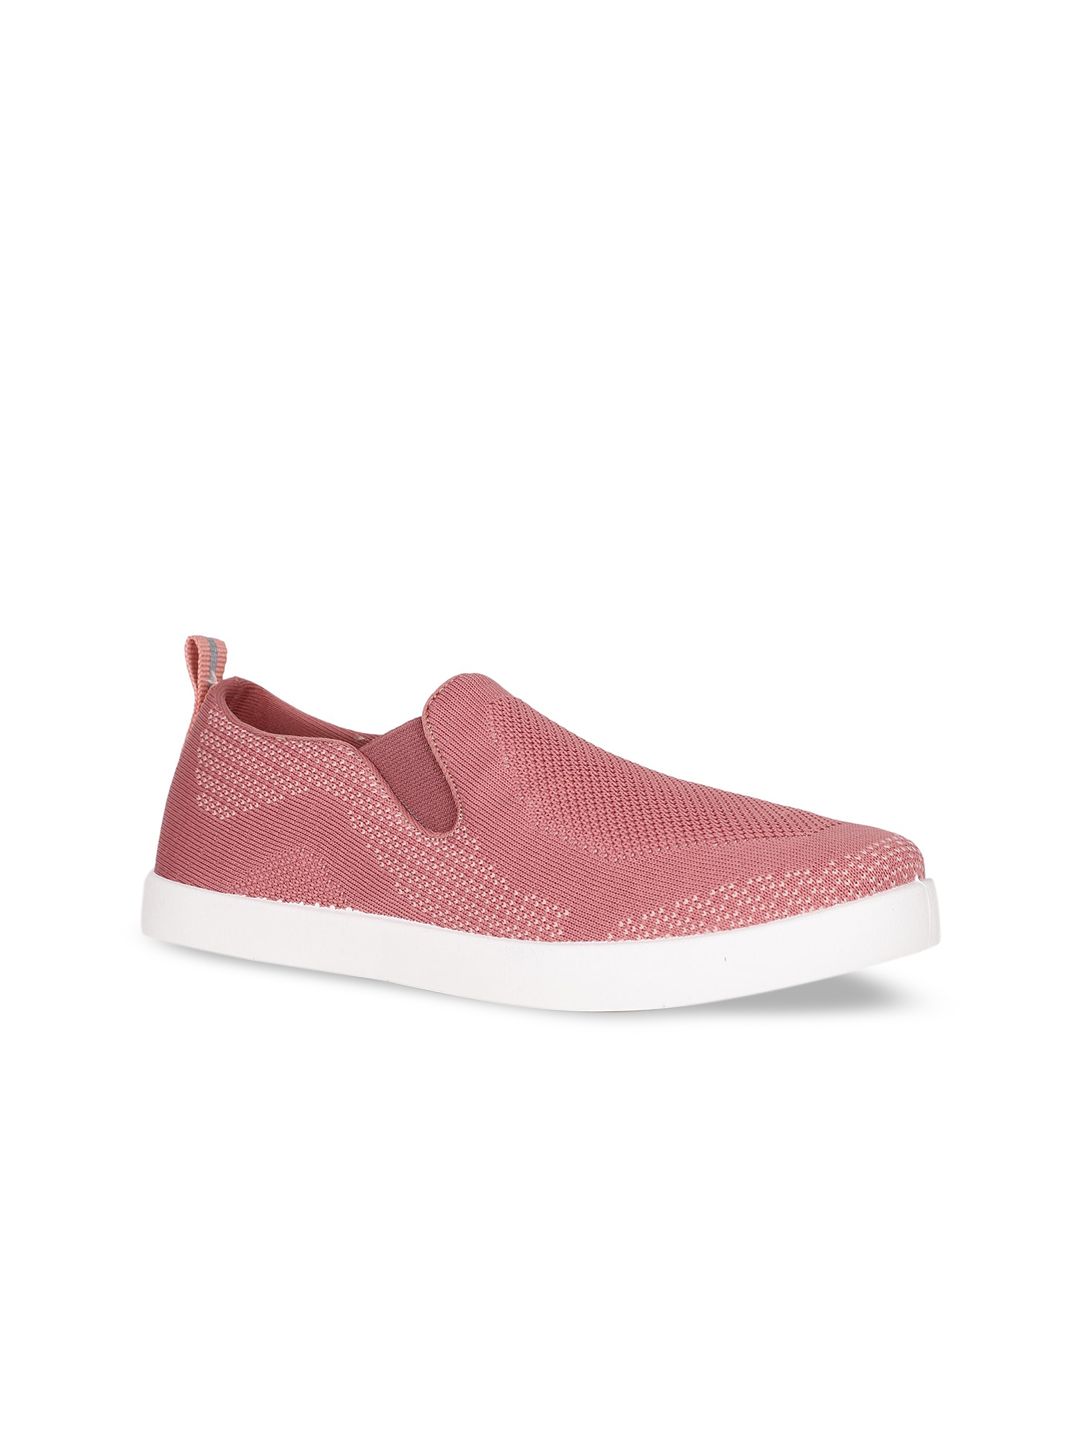 Bata Women Pink Perforations Slip-On Sneakers Price in India